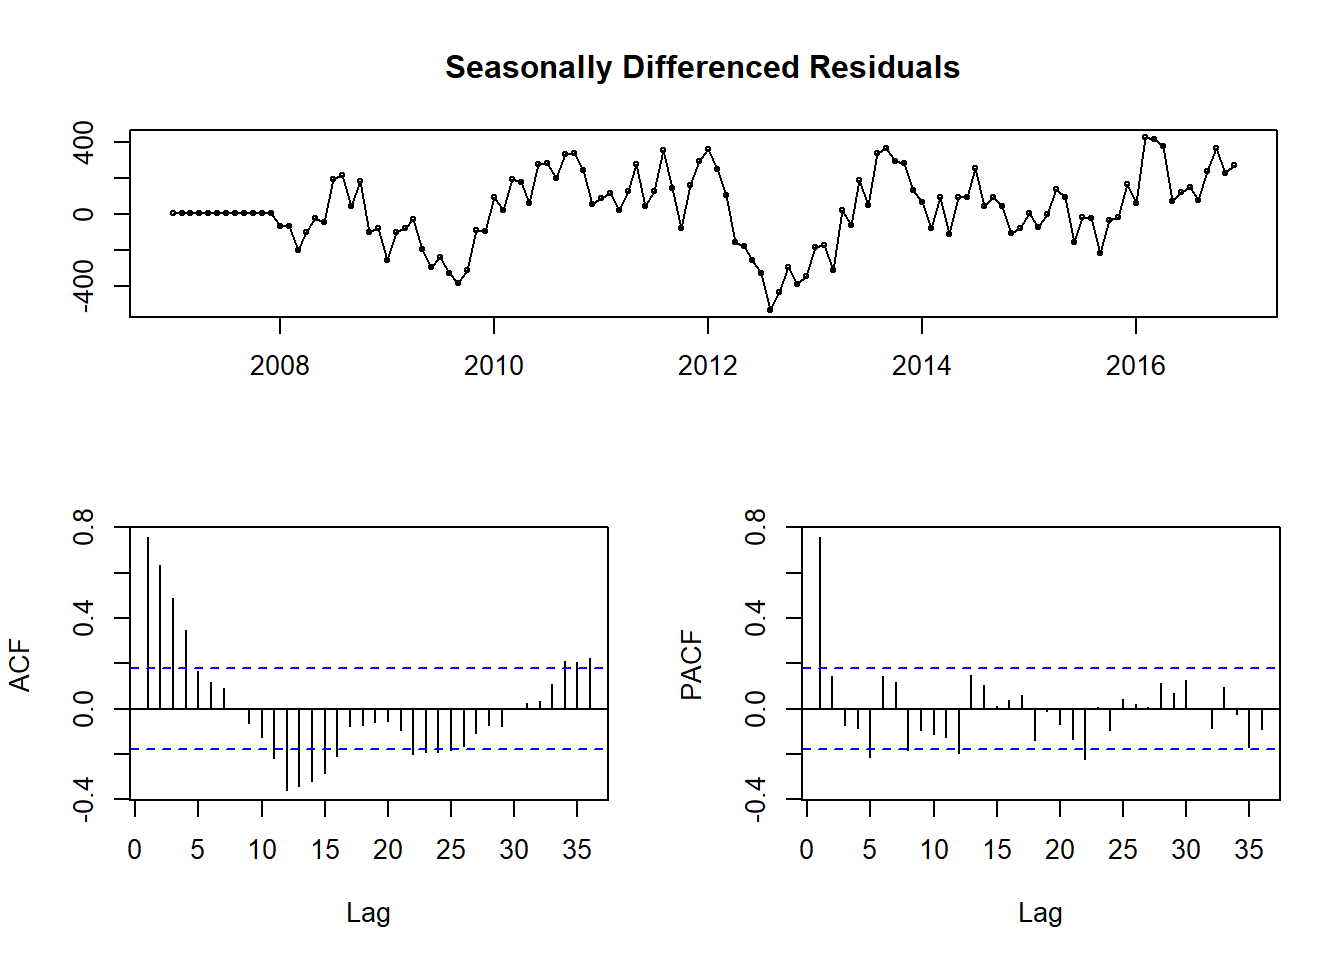 Residuals of ARIMA model with seasonal differencing term